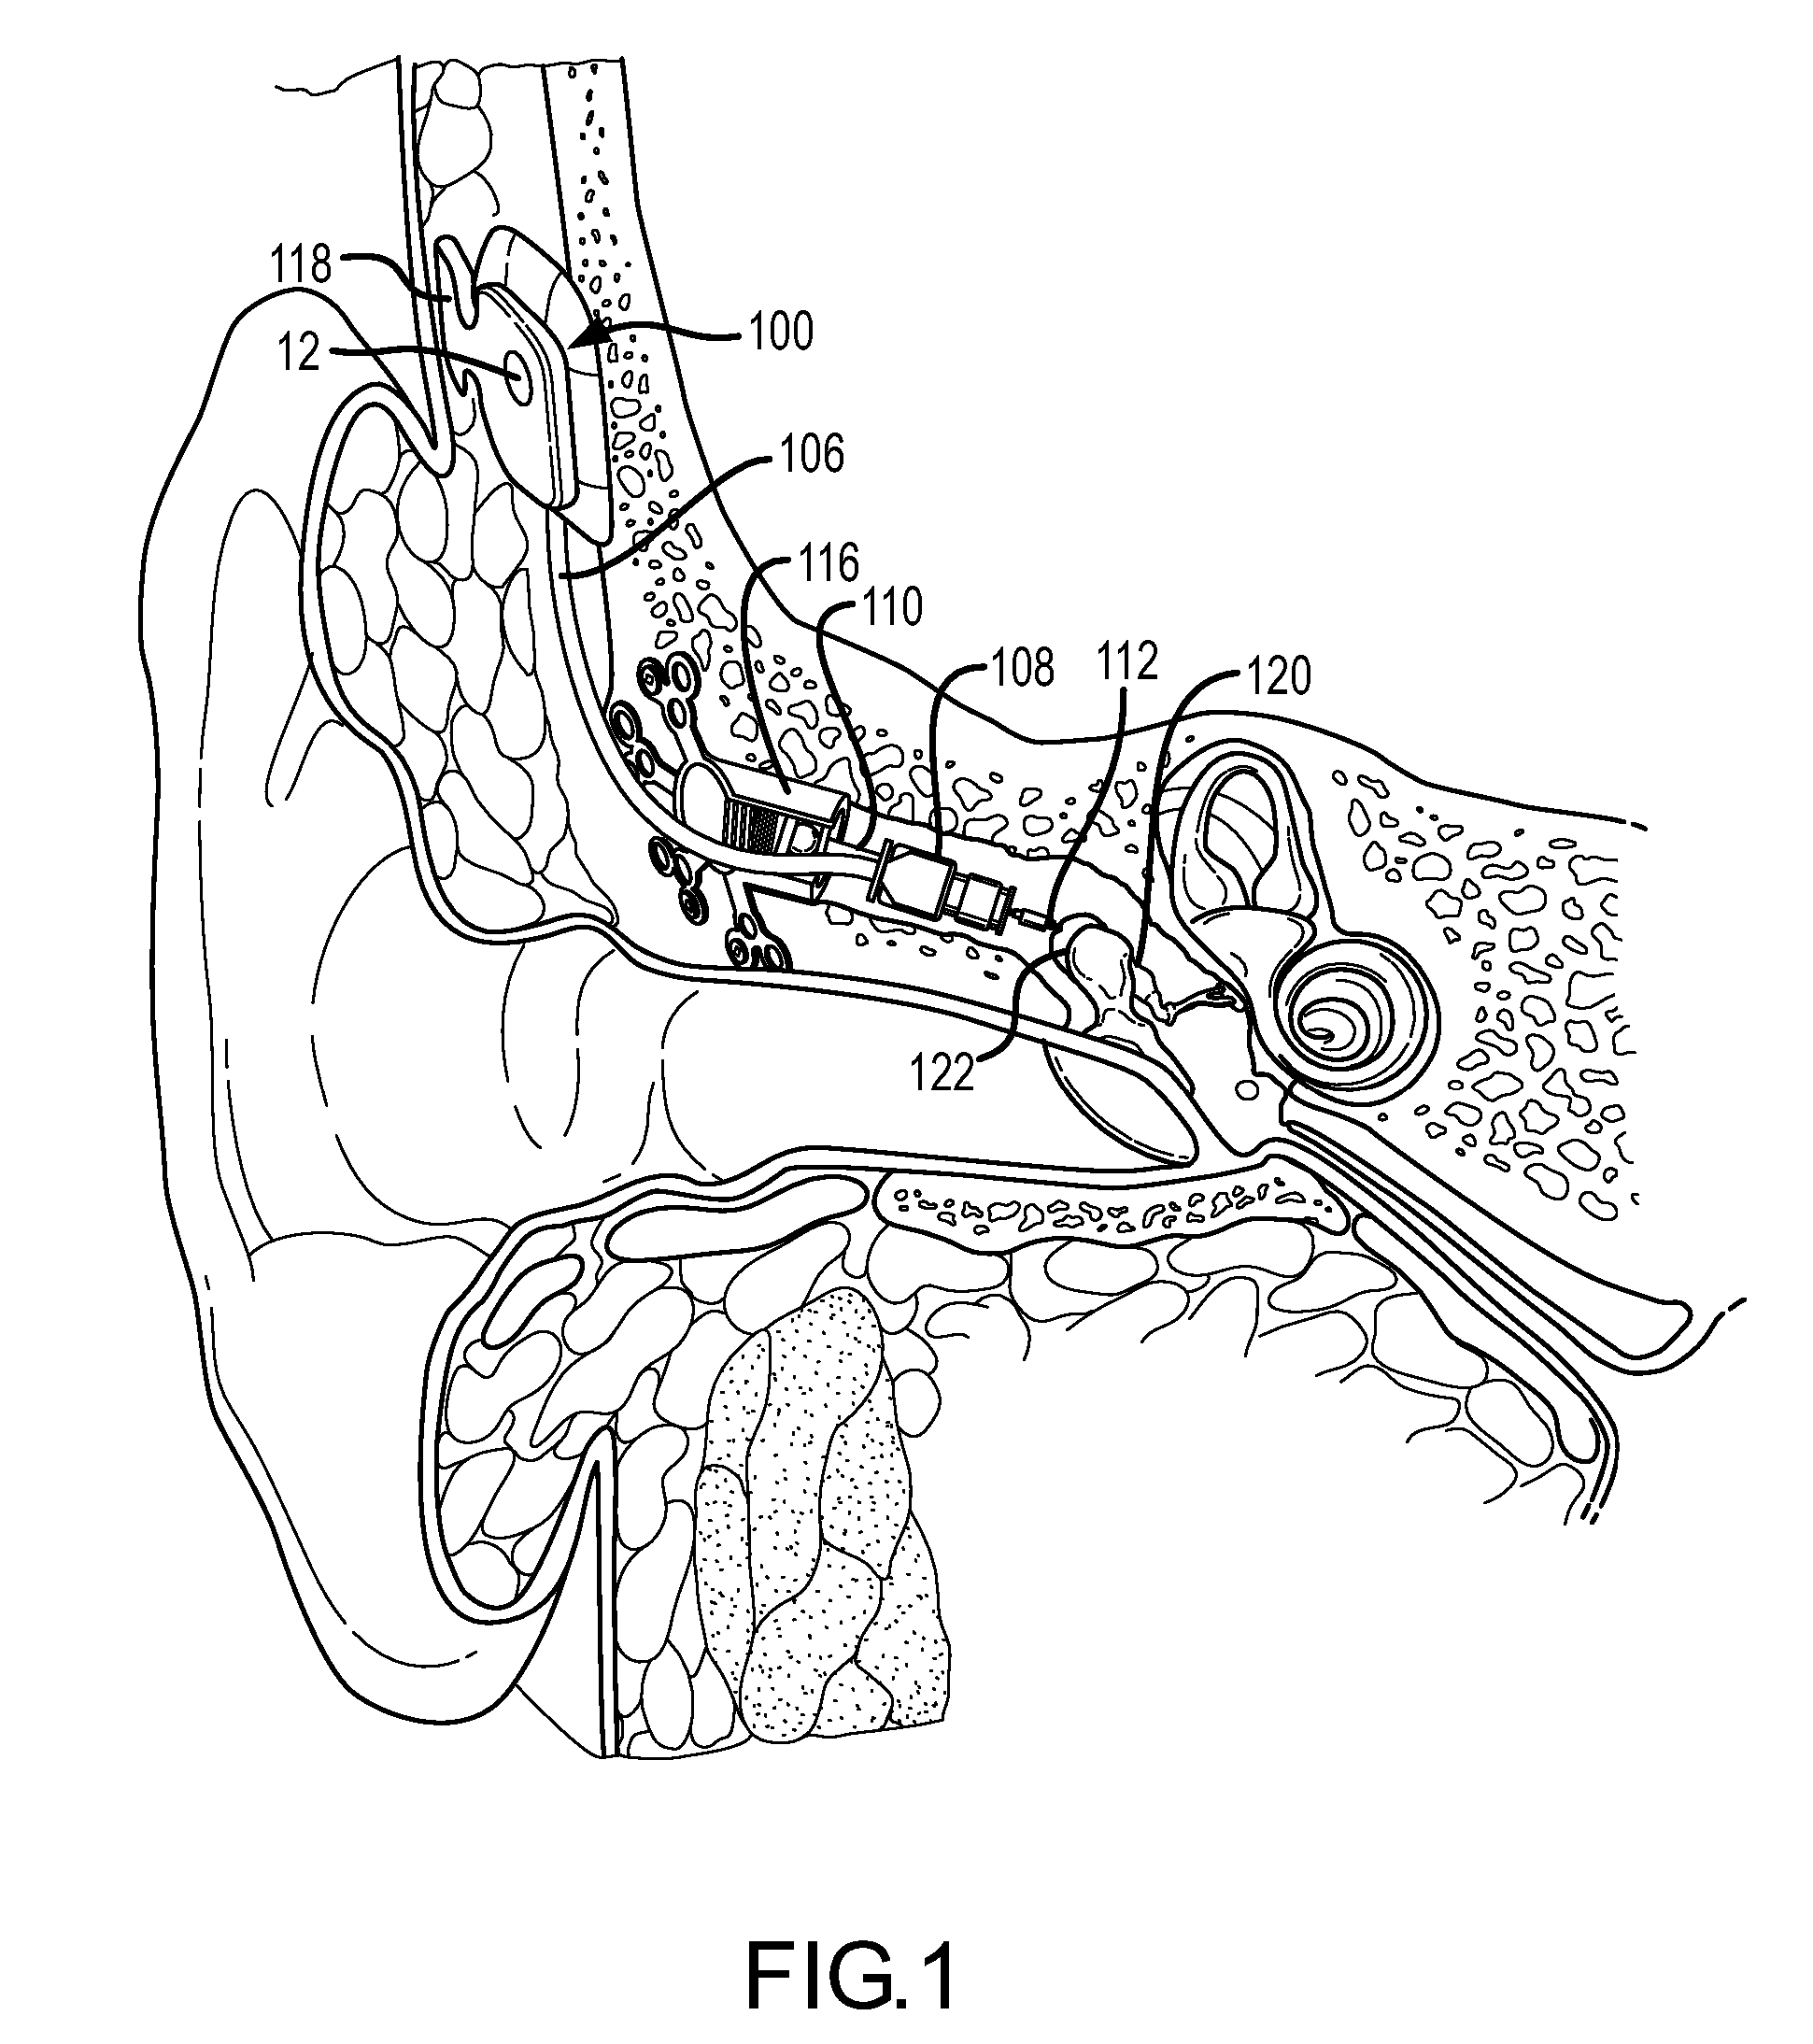 Dual feedback control system for implantable hearing instrument